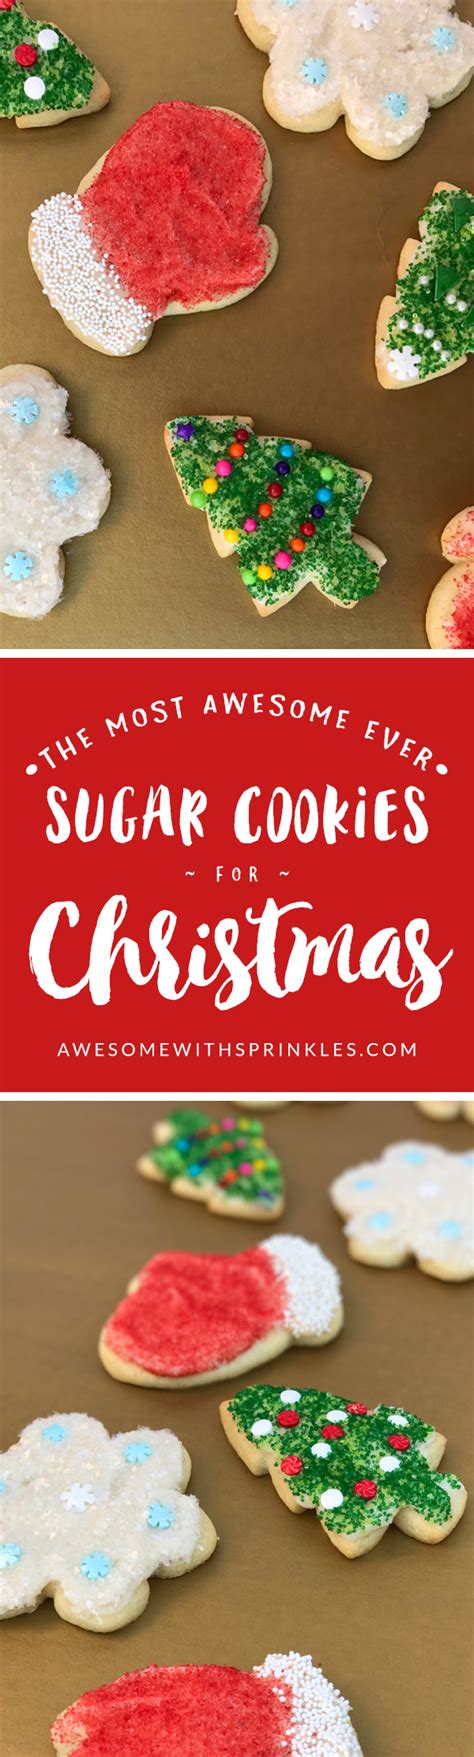 The Most Awesome Ever Sugar Cookies Awesome With Sprinkles Recipe